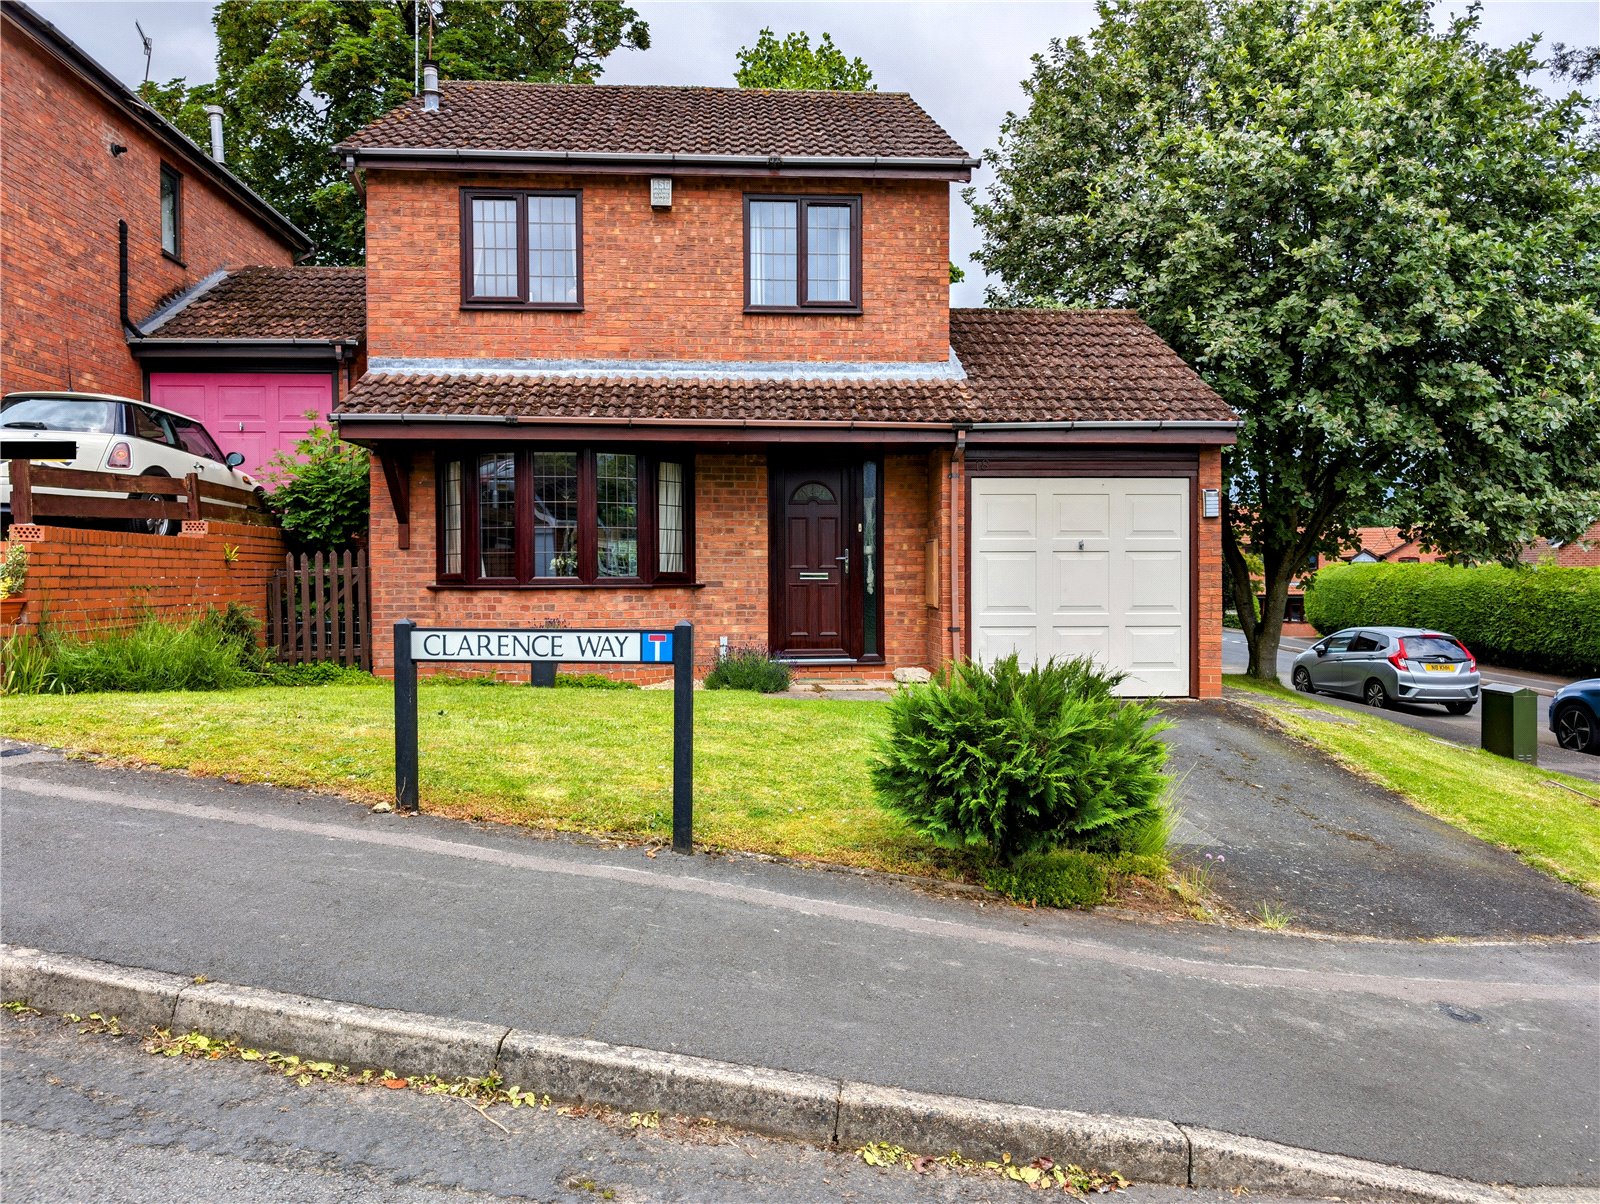 Clarence Way, Bewdley, DY12